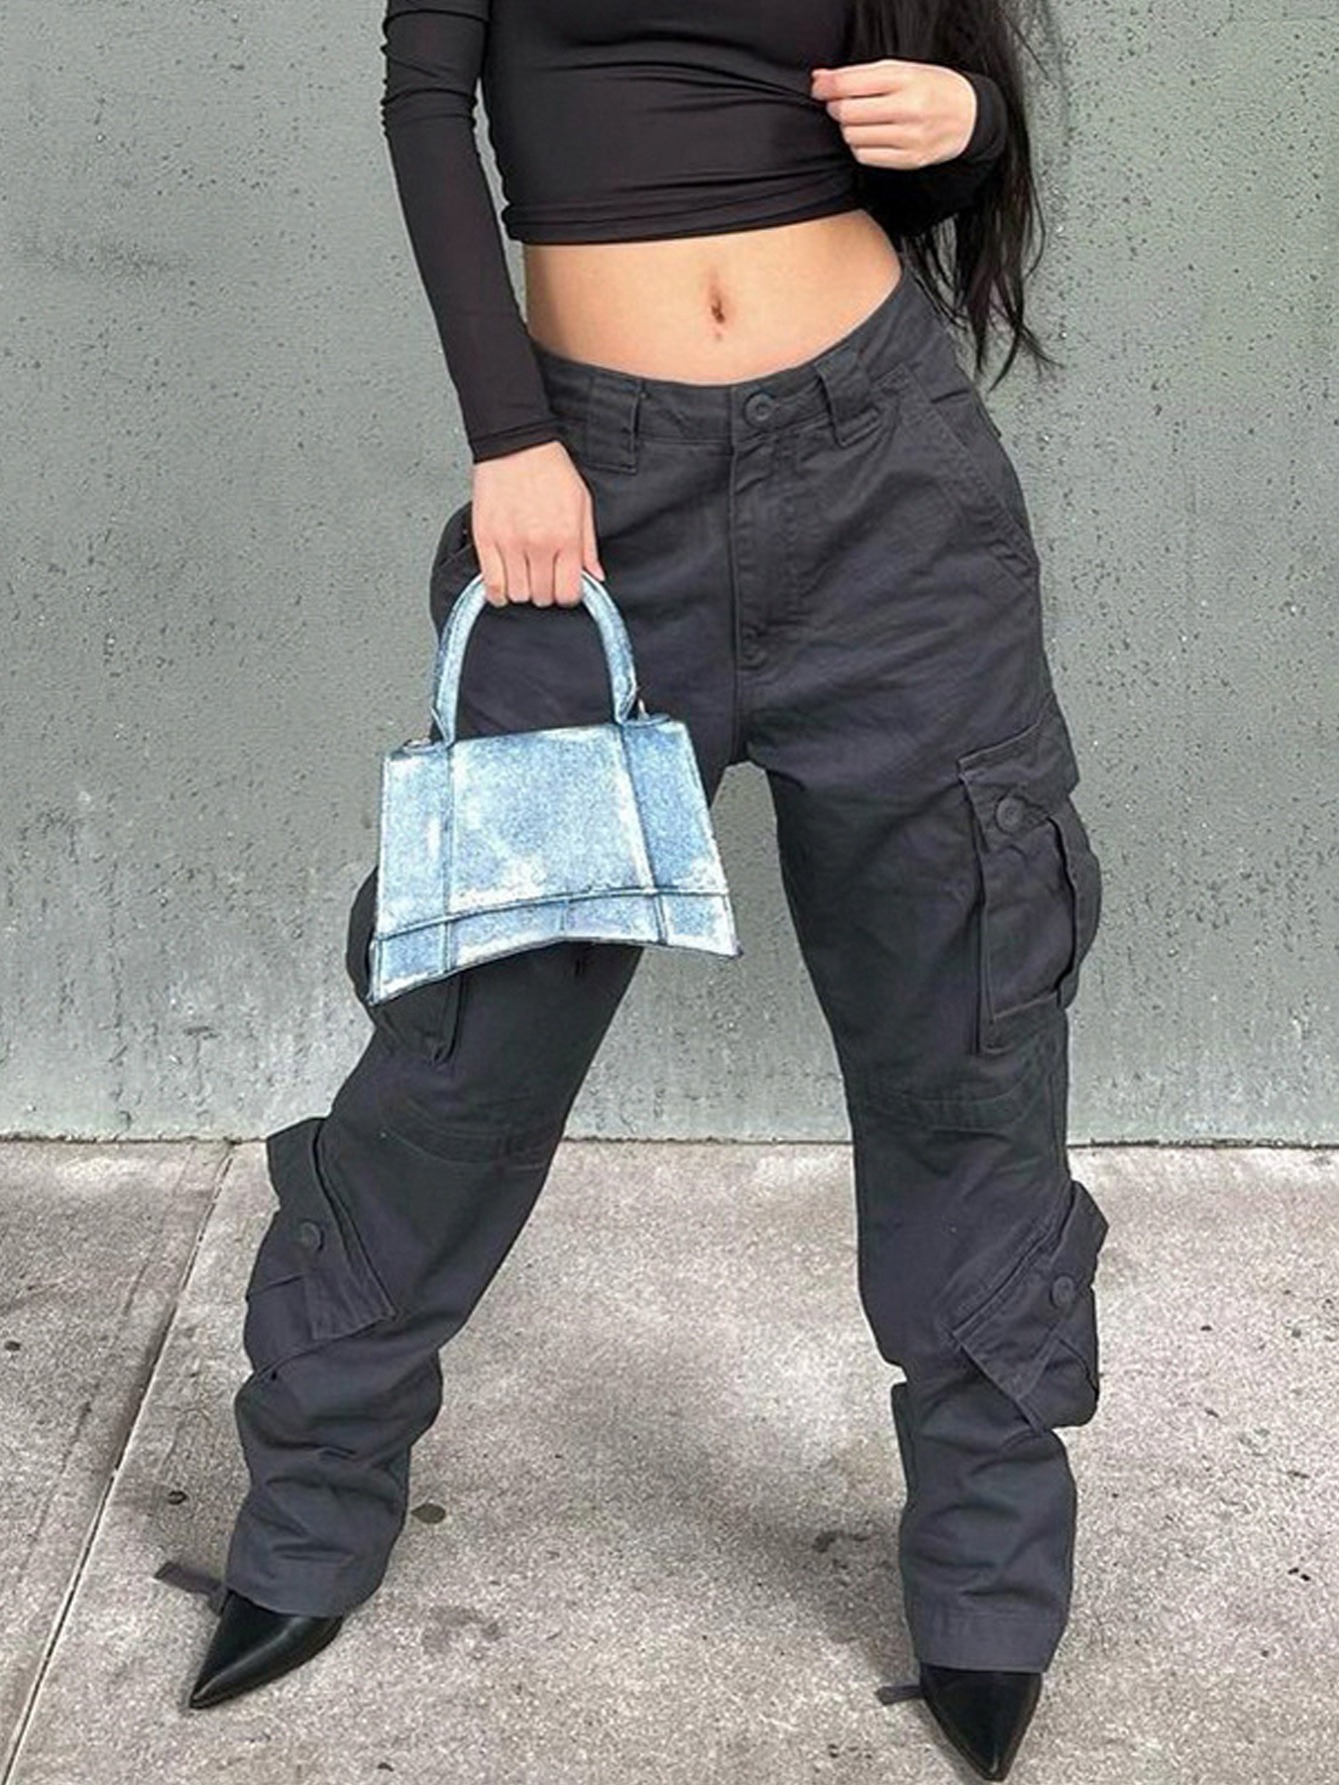 *-* Dark Gray Cargo Pants, Relaxed Fit Loose Straight Leg Cargo Style Jeans  With Pockets, Y2K Kpop Vintage Style, Women's Clothing & Denim